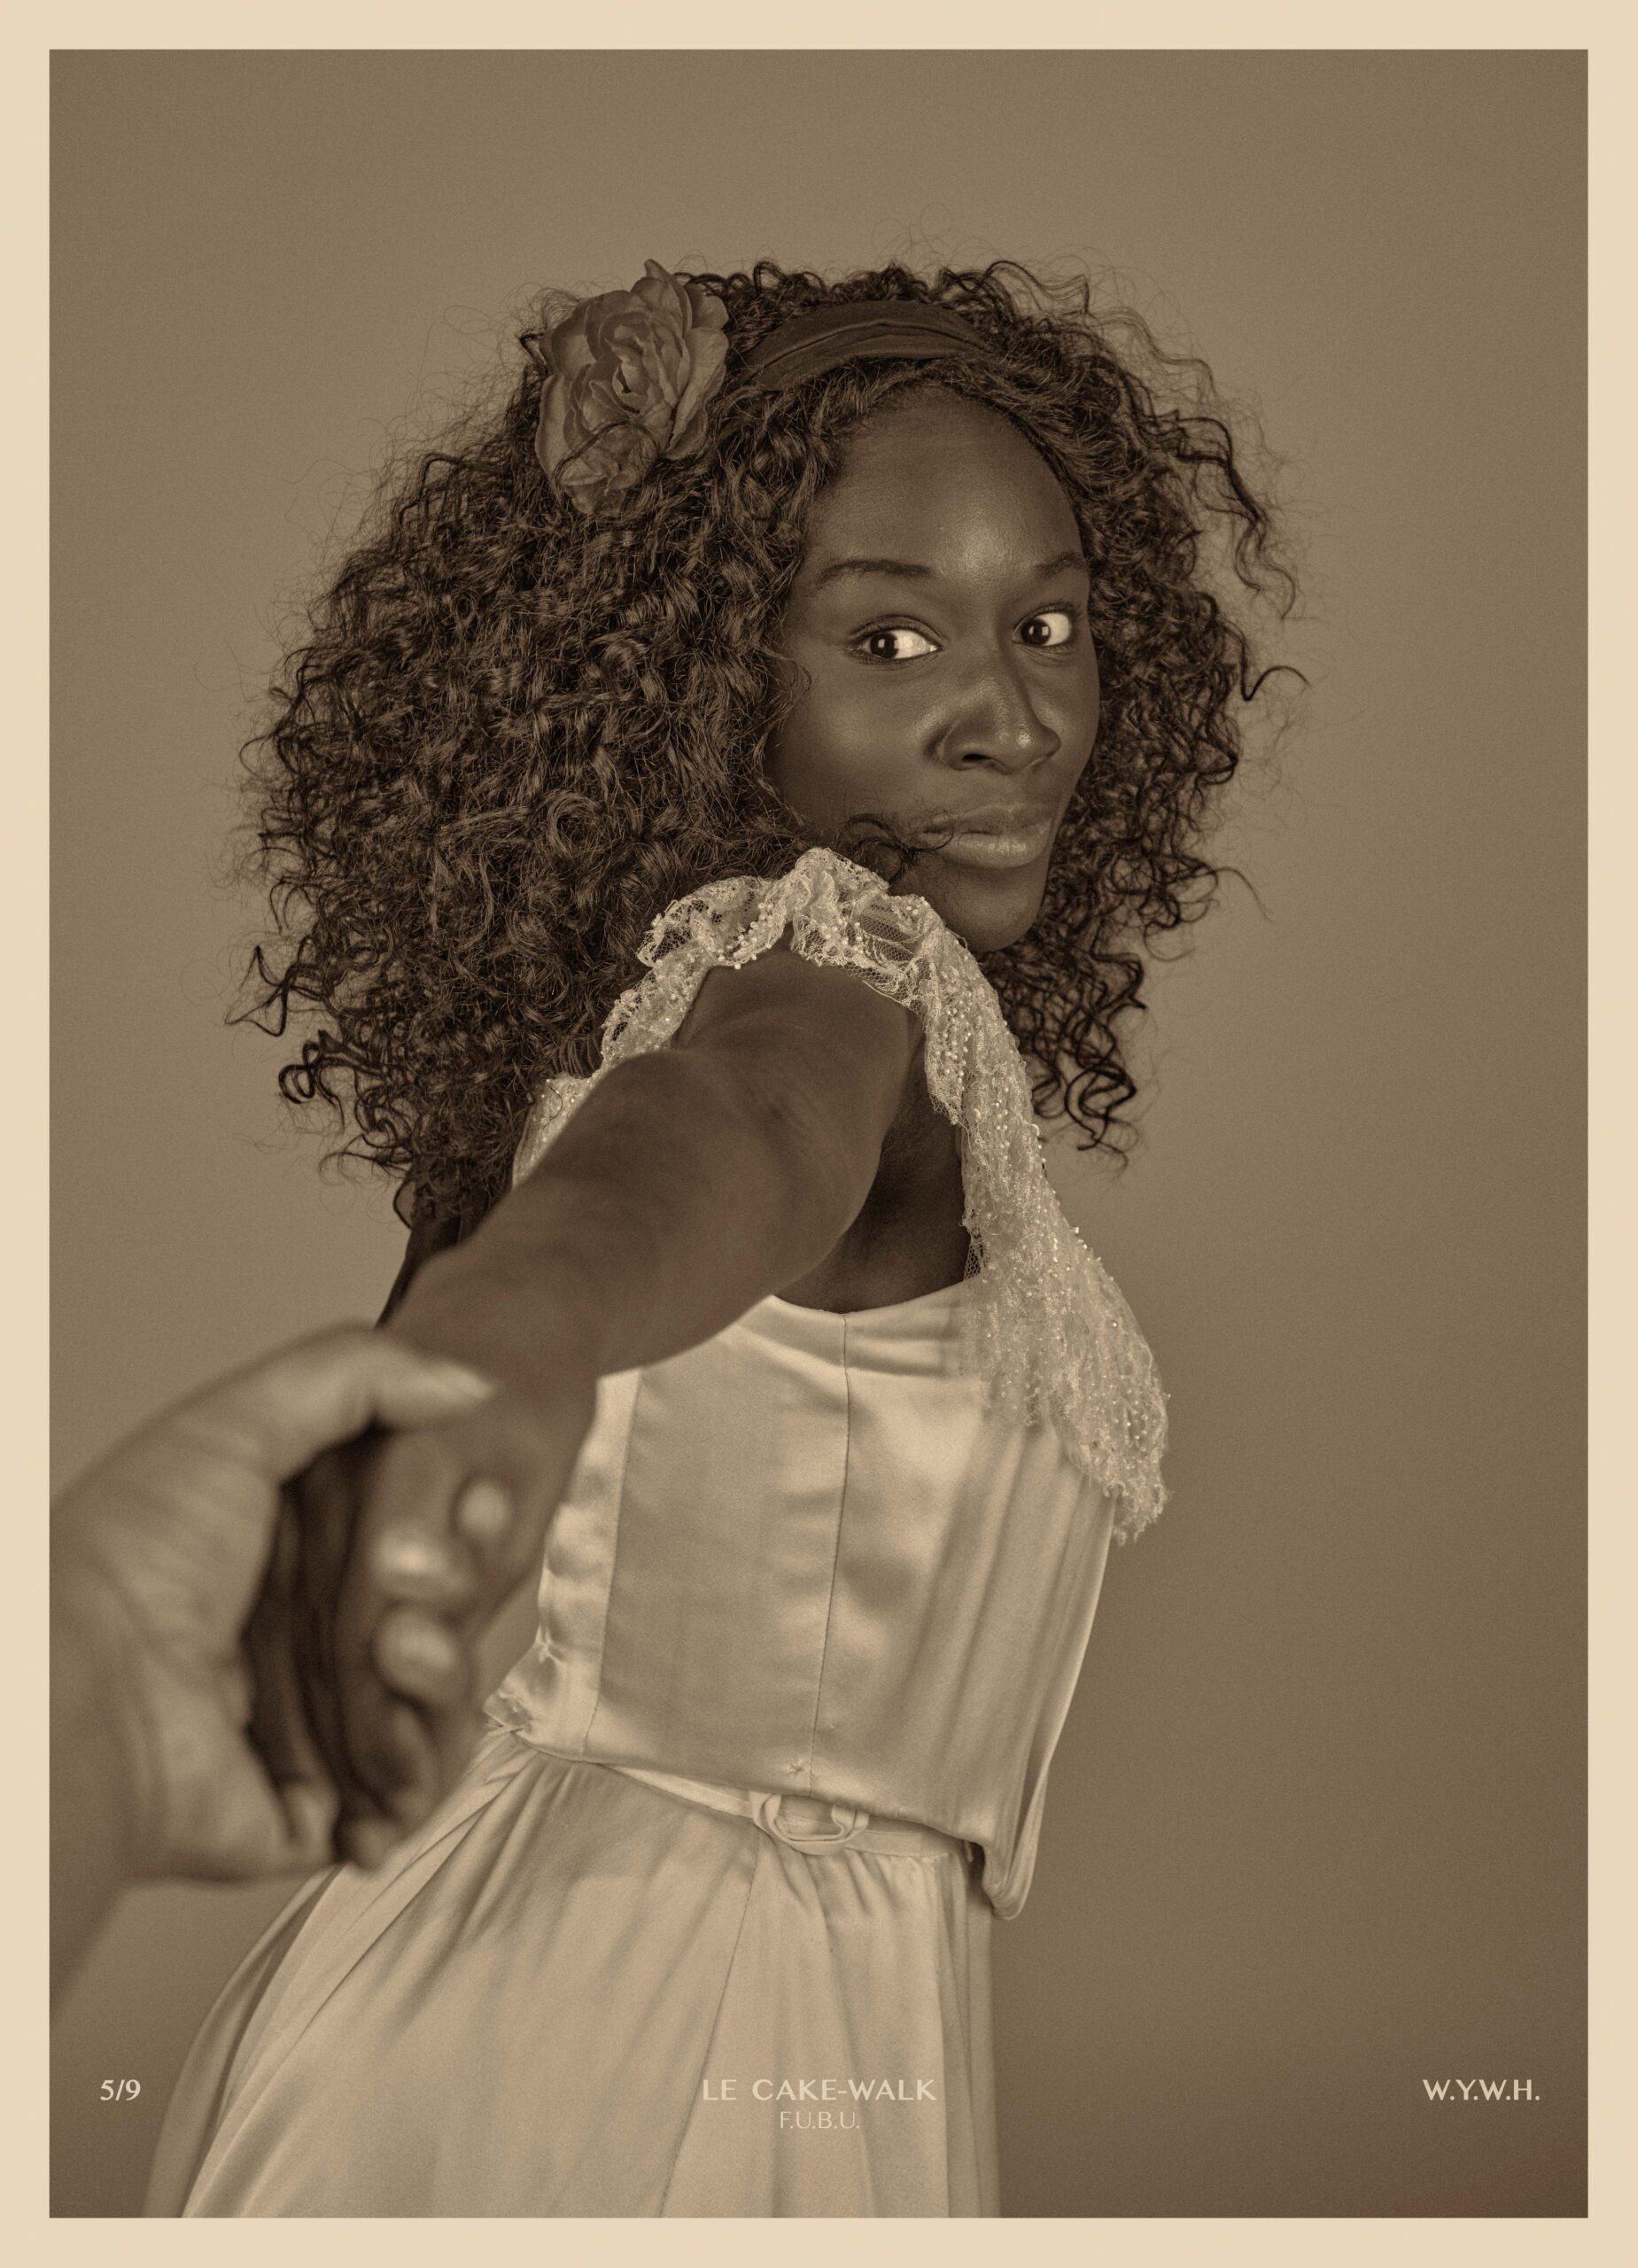 Interview image: From the exhibition A Pciture of Health, Heather Agyepong is dressed in a white dress holding hands with someone behind the camera, the image is sepia toned.